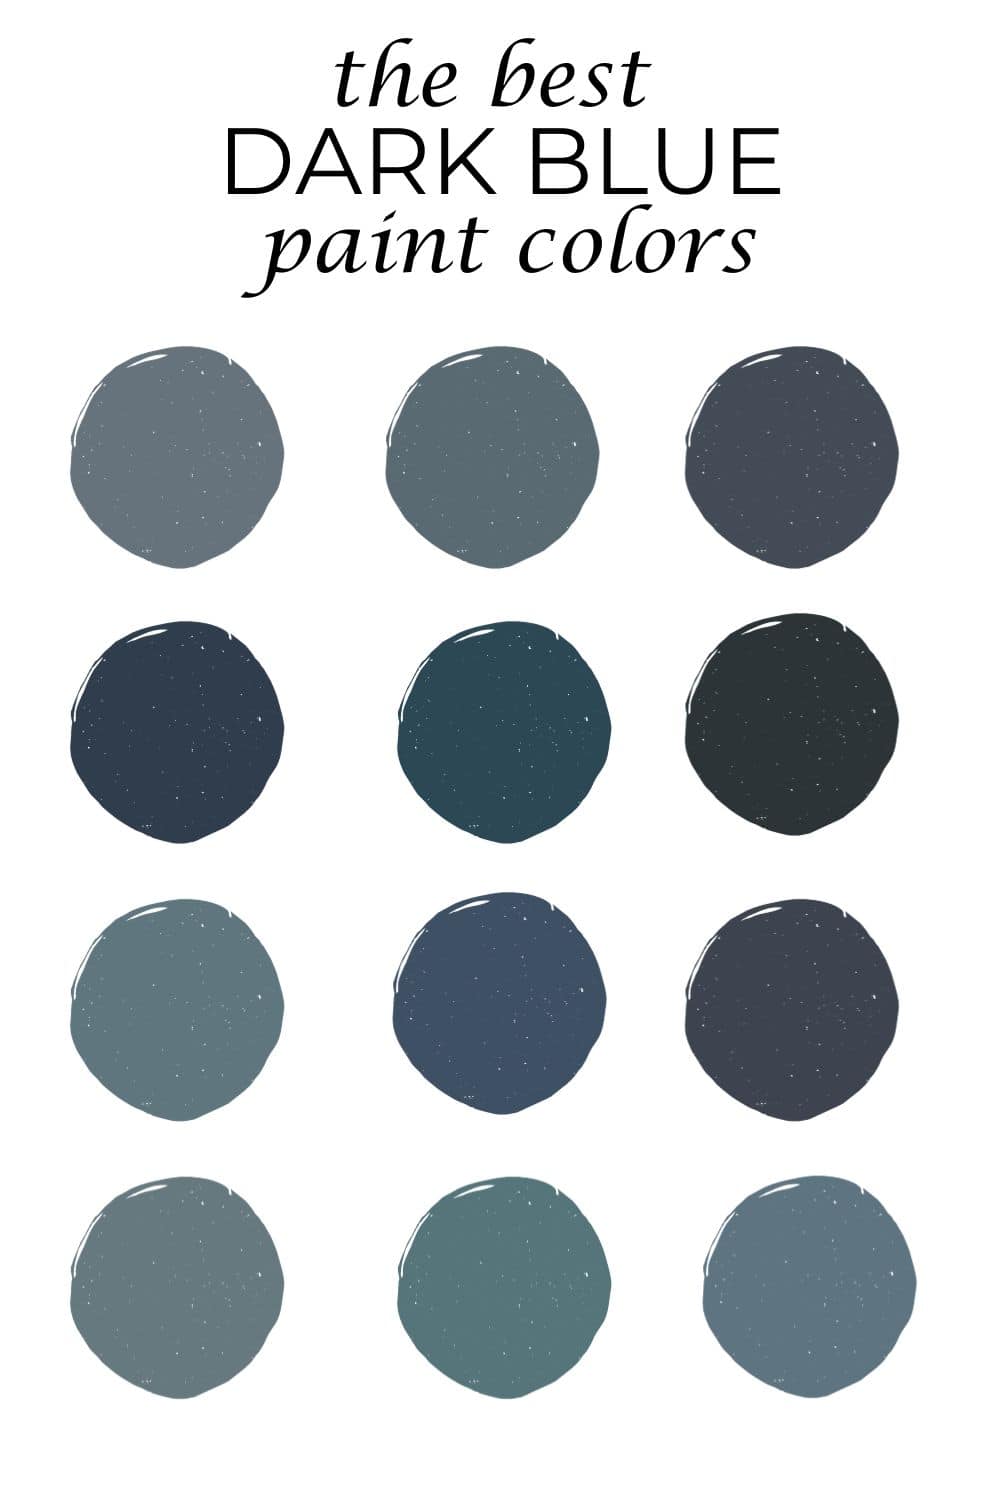 Beautiful dark blue paint colors for your home